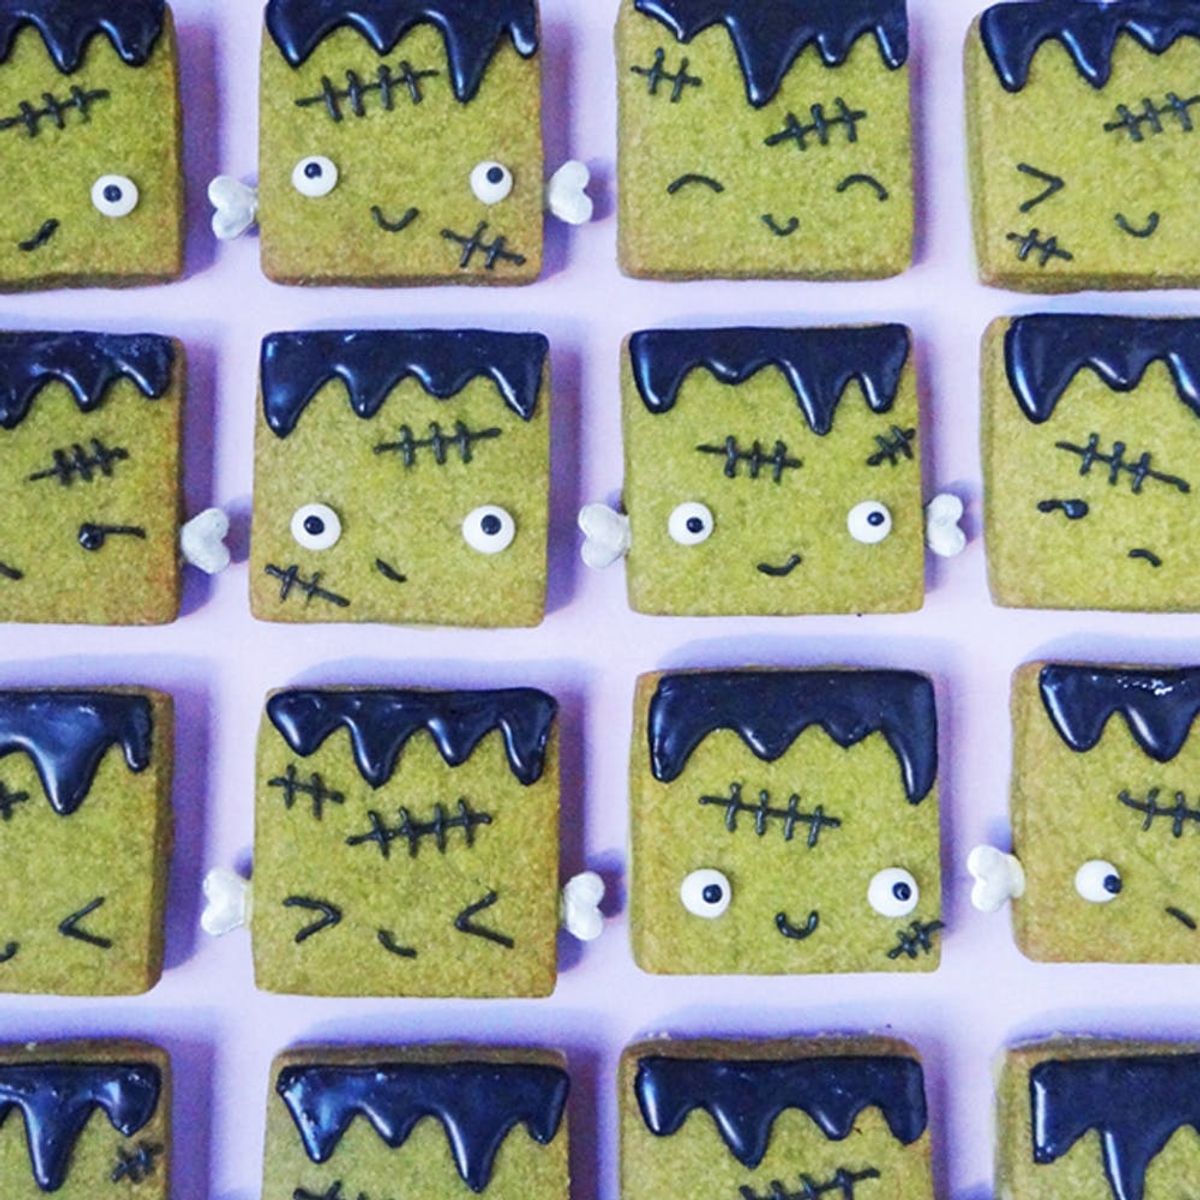 Creeping It Real With These Tea-Licious Frankenstein Halloween Cookies Recipe